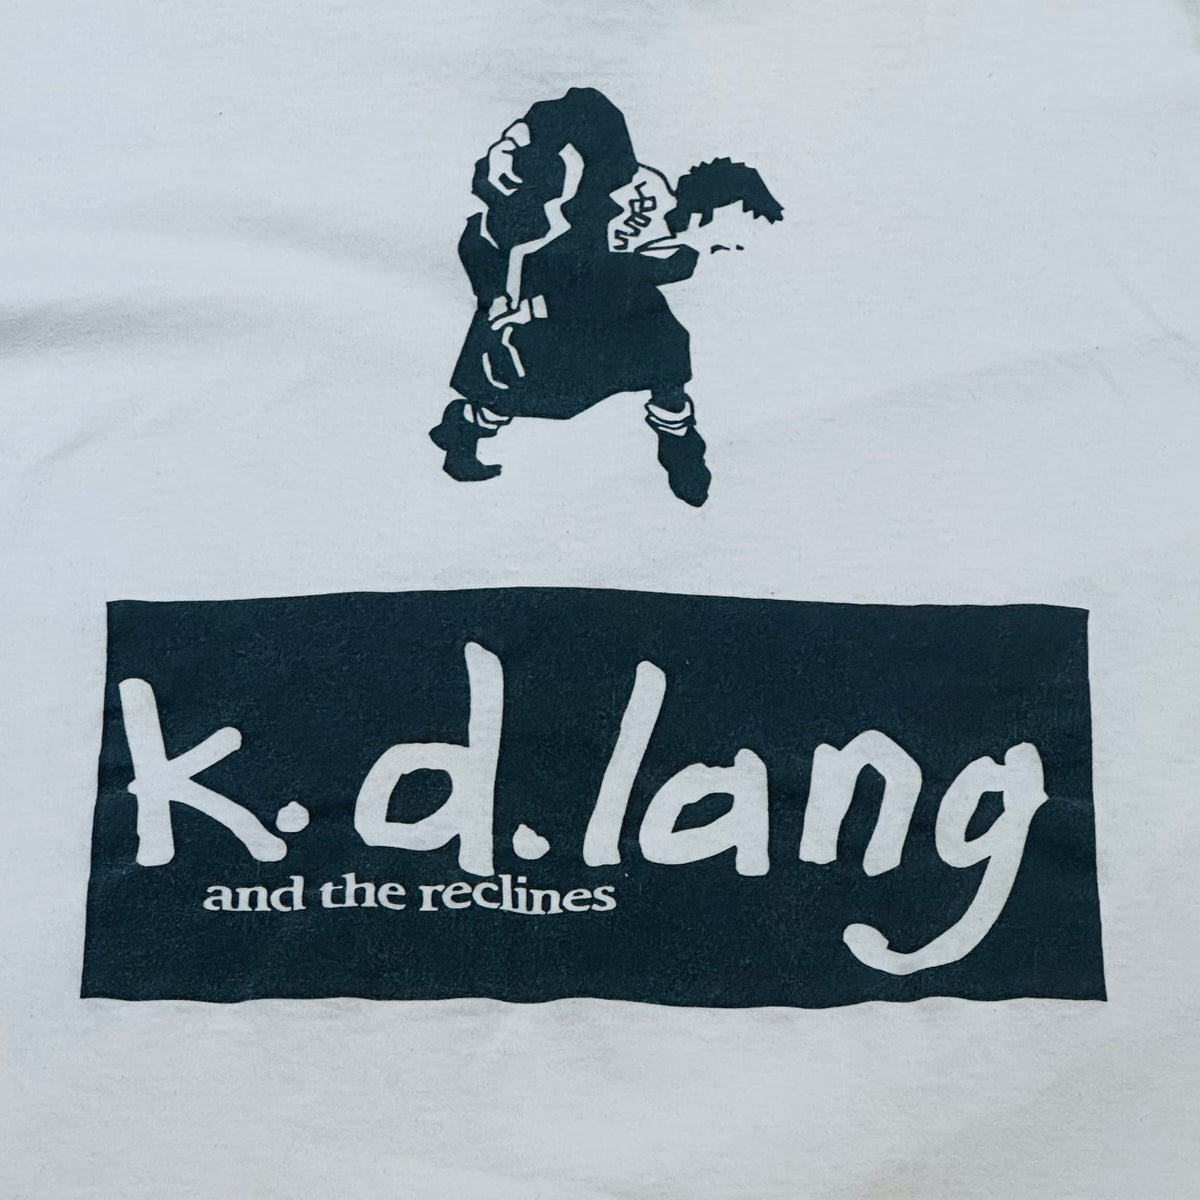 1985 RARE Vintage K.D LANG and The Reclines concert shirt